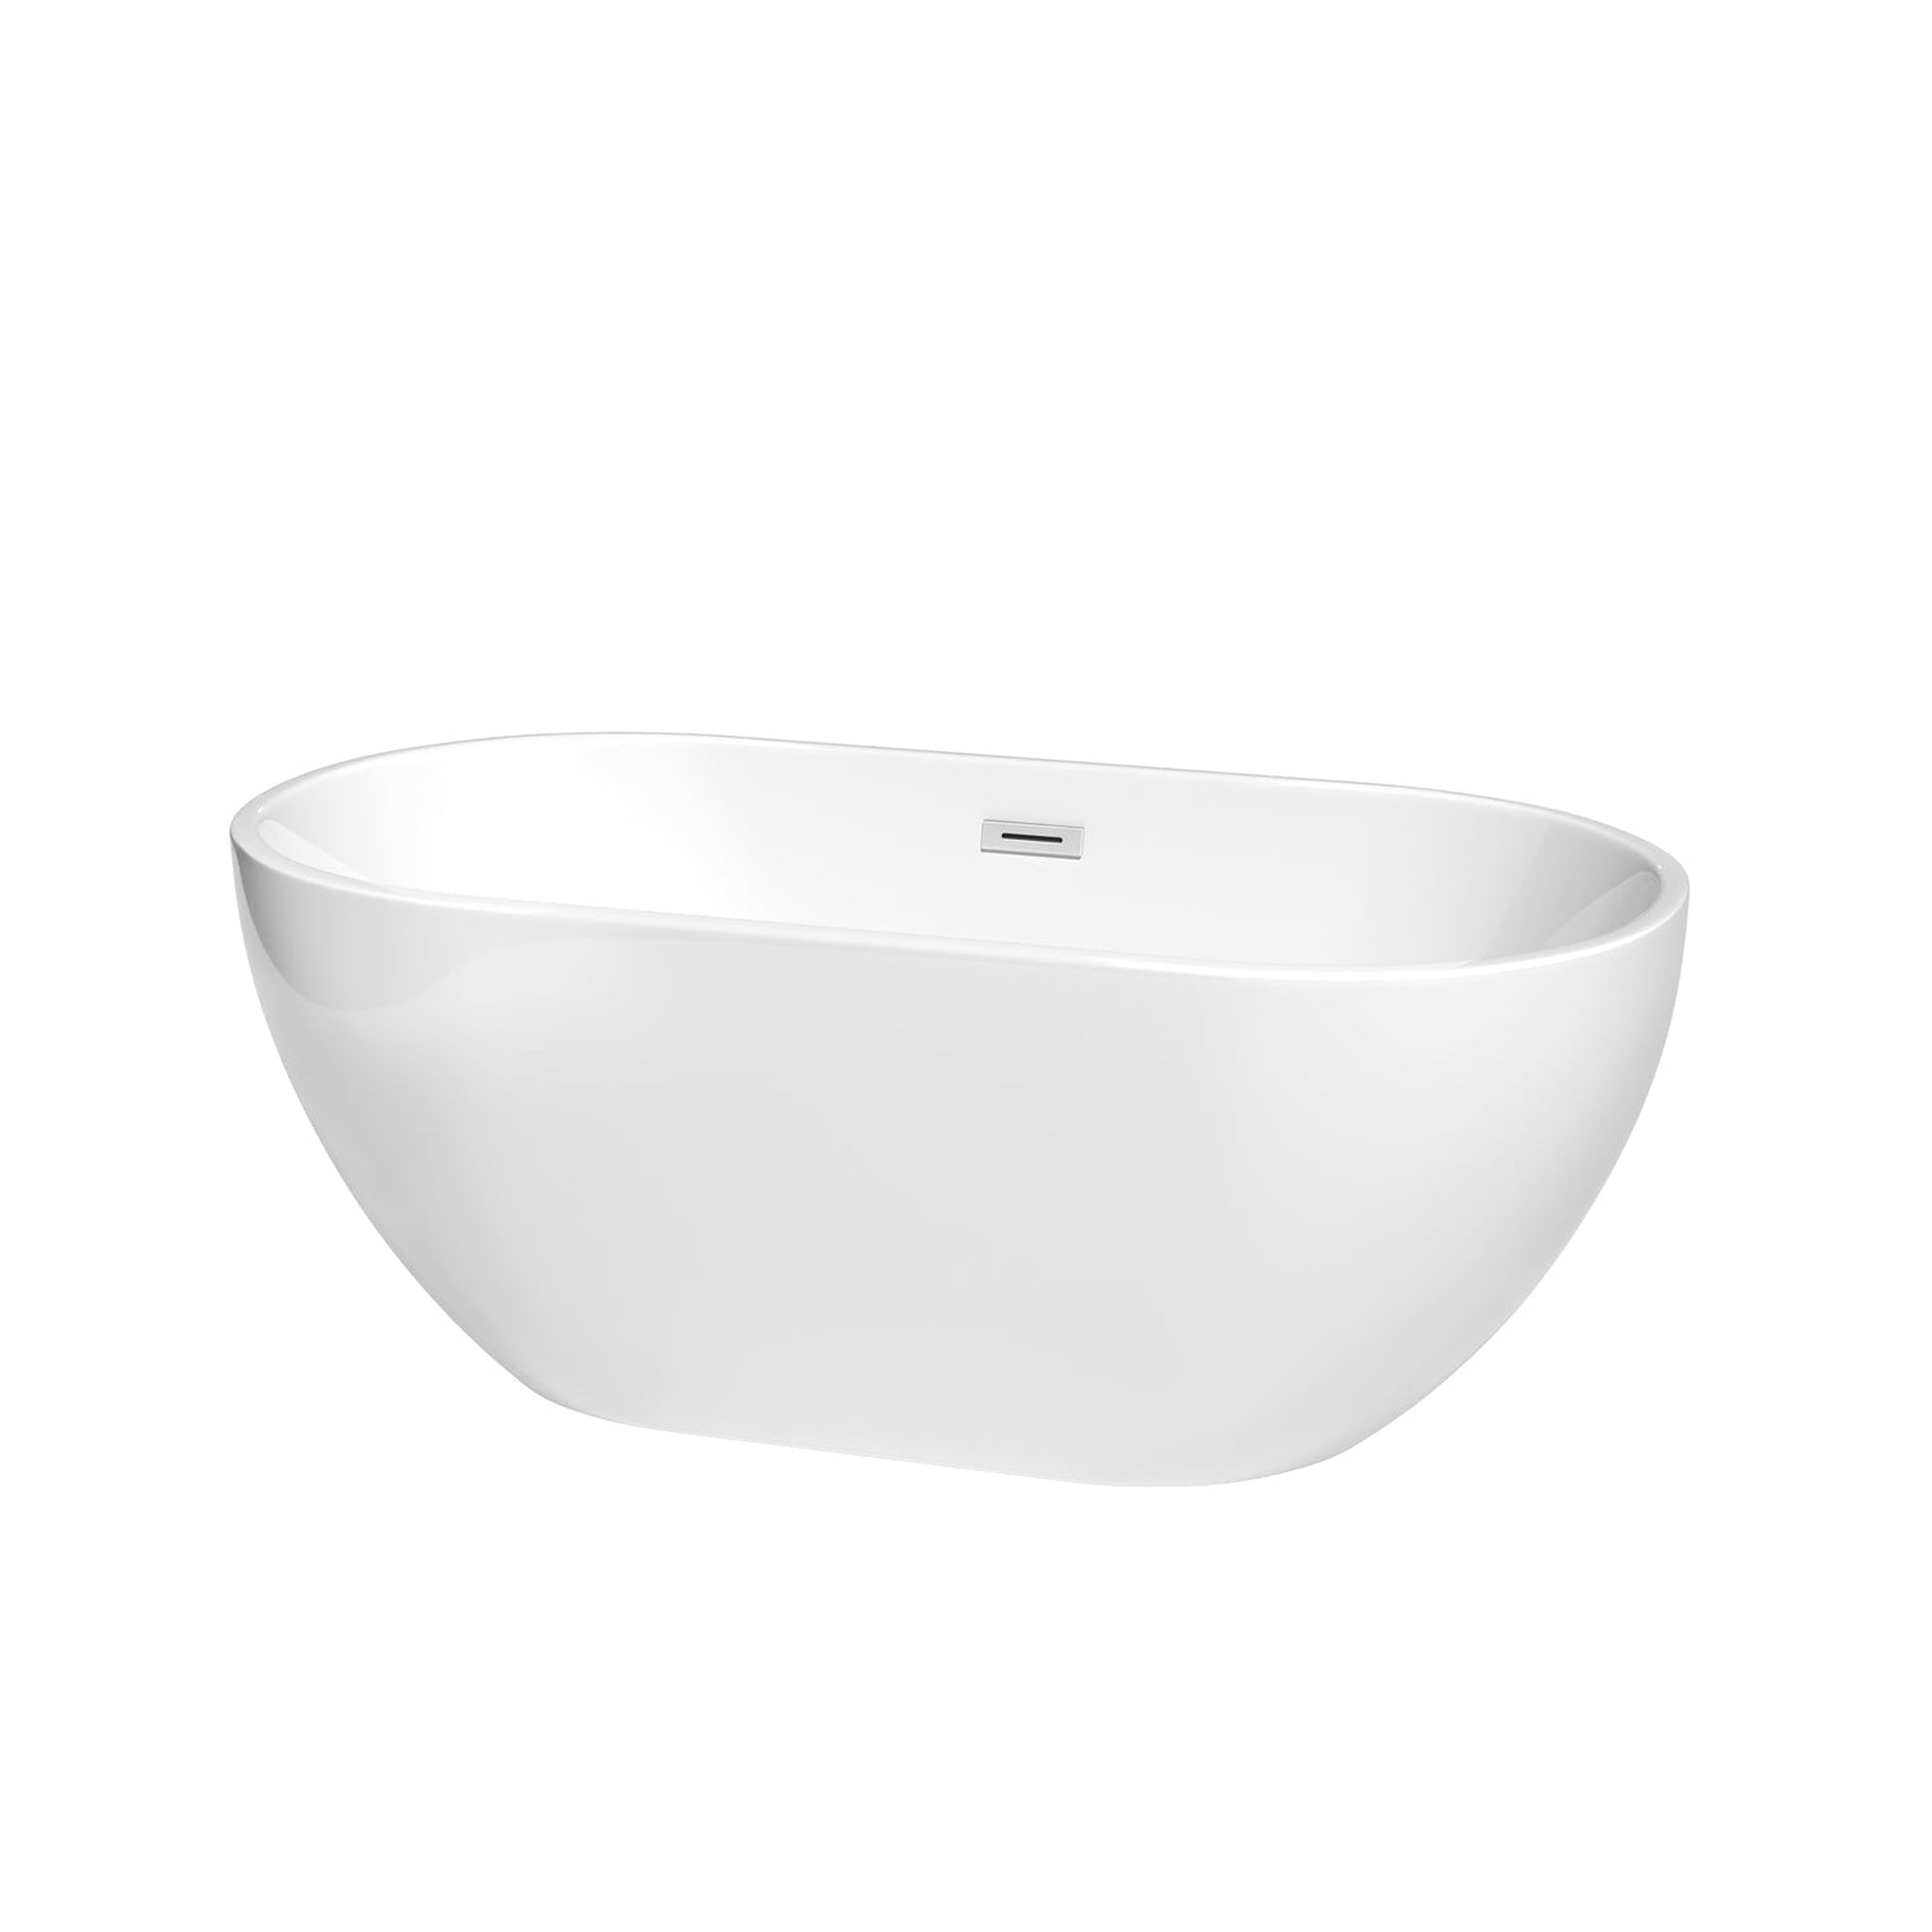 Wyndham Collection Brooklyn 60" Freestanding Bathtub in White With Polished Chrome Drain and Overflow Trim